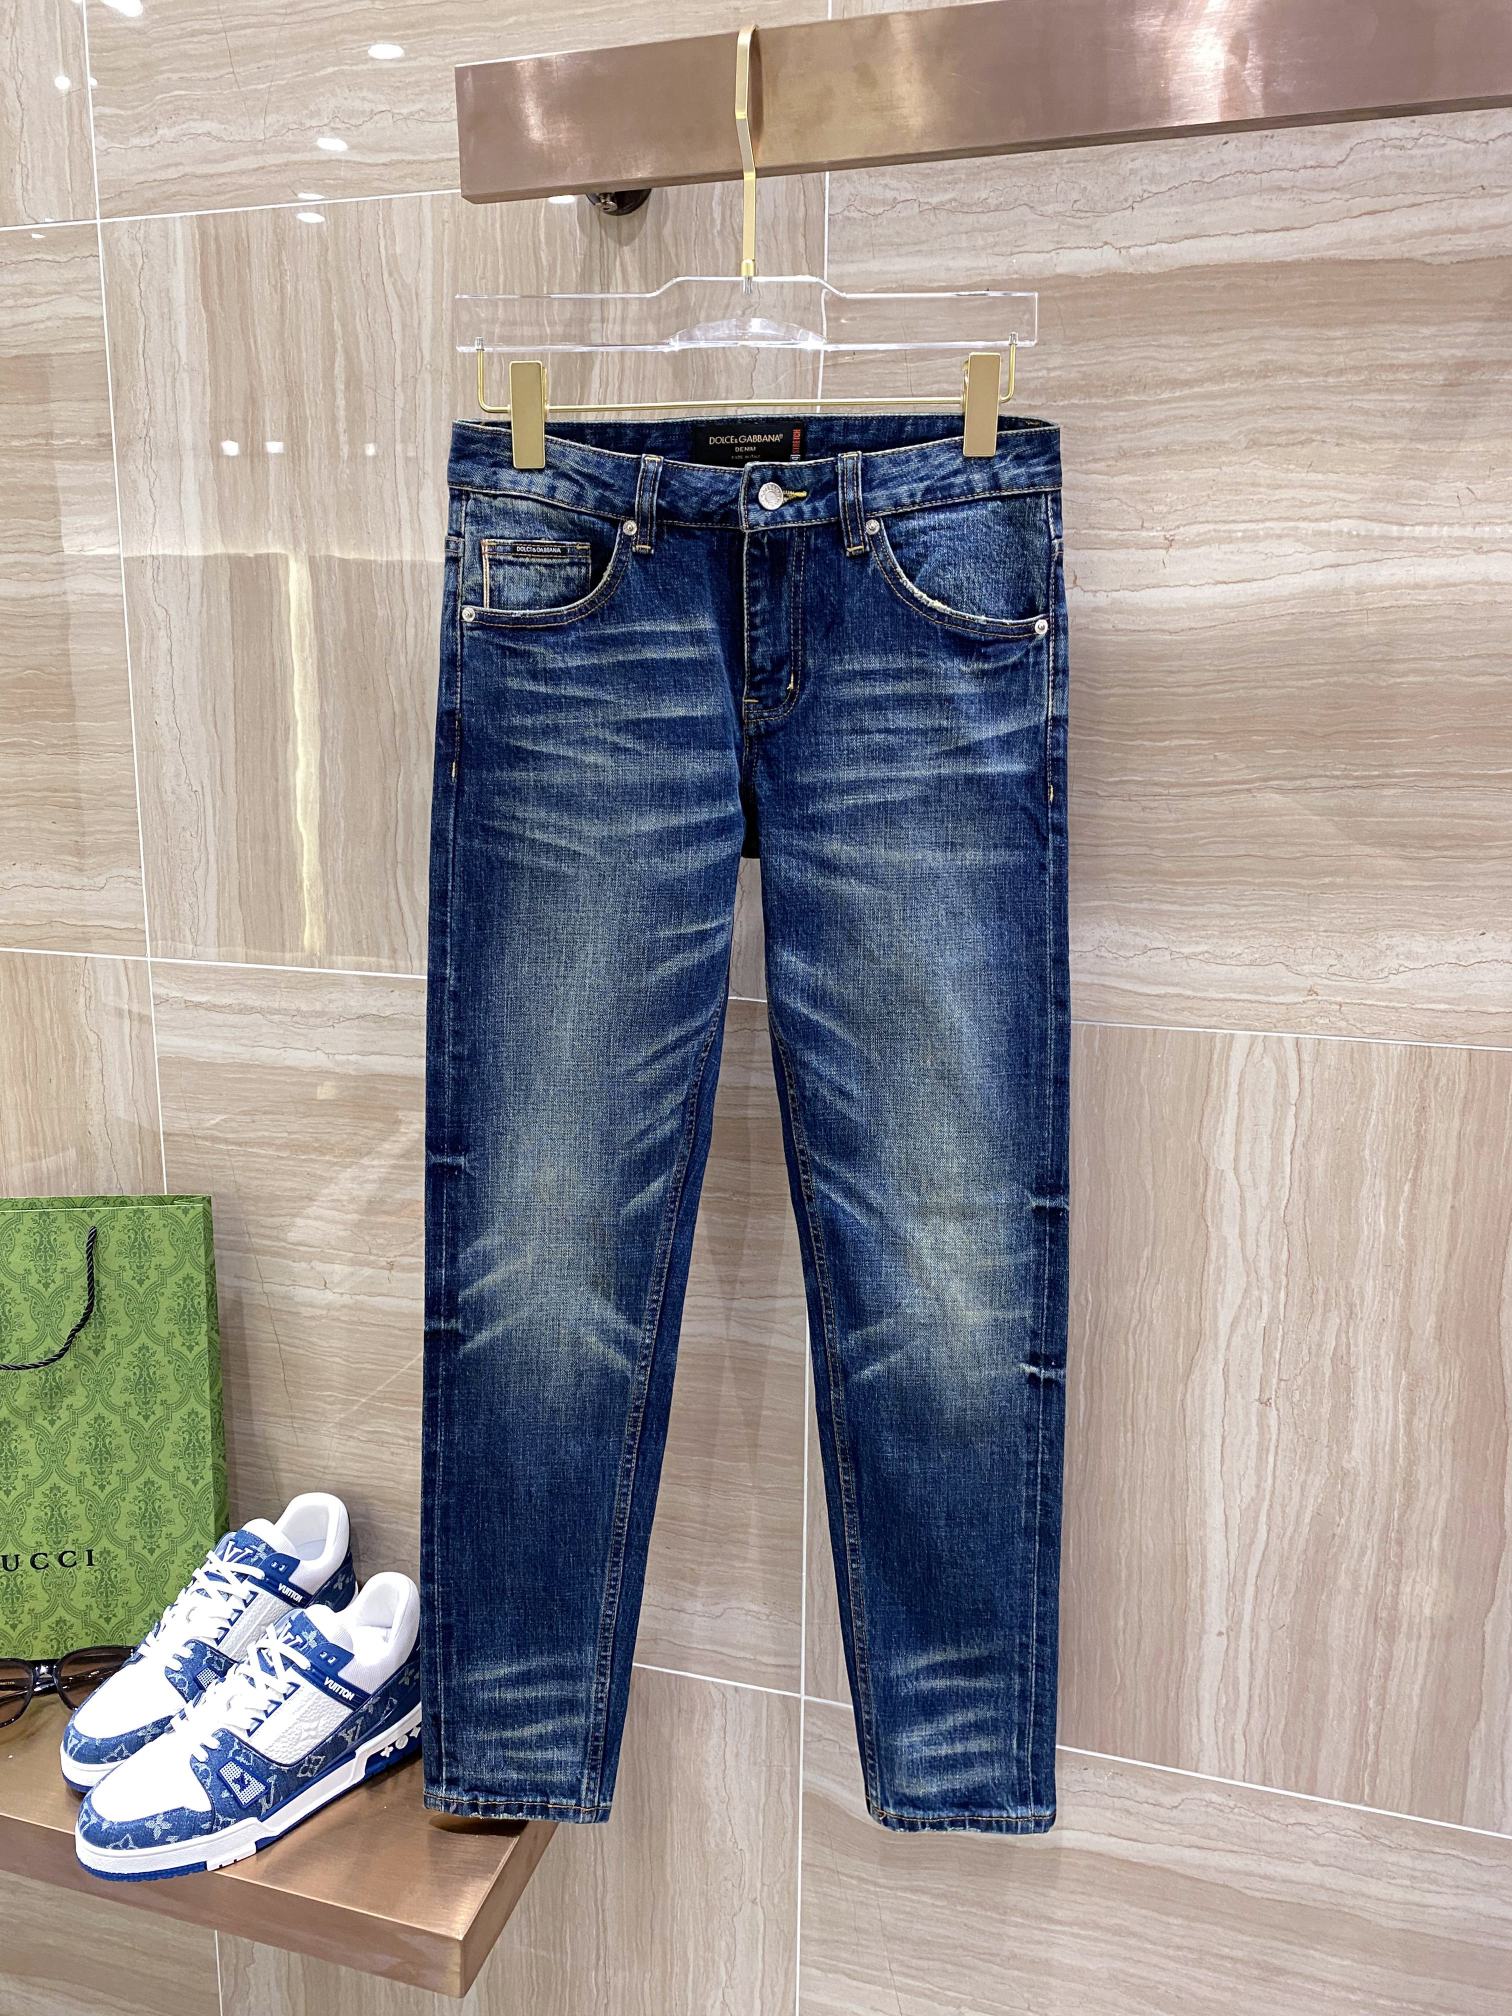 Gucci Clothing Jeans Vintage